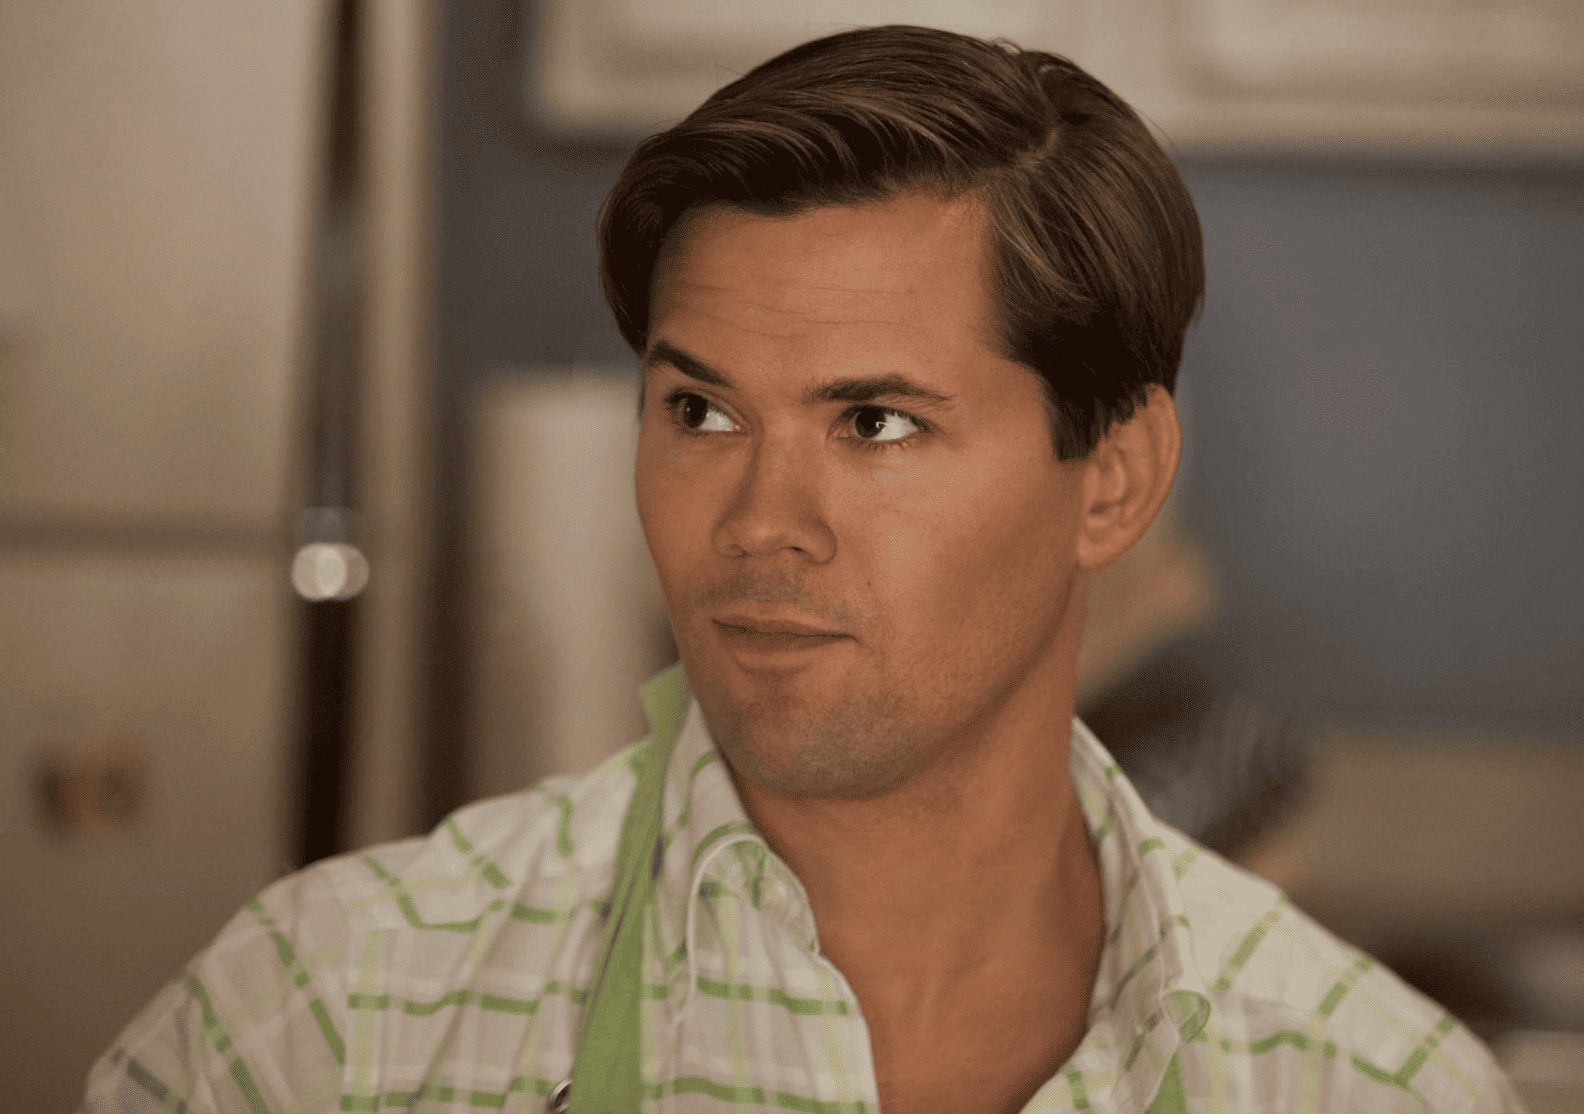 Elijah cooking while wearing an apron in Hannah’s kitchen in this image from Apatow Productions